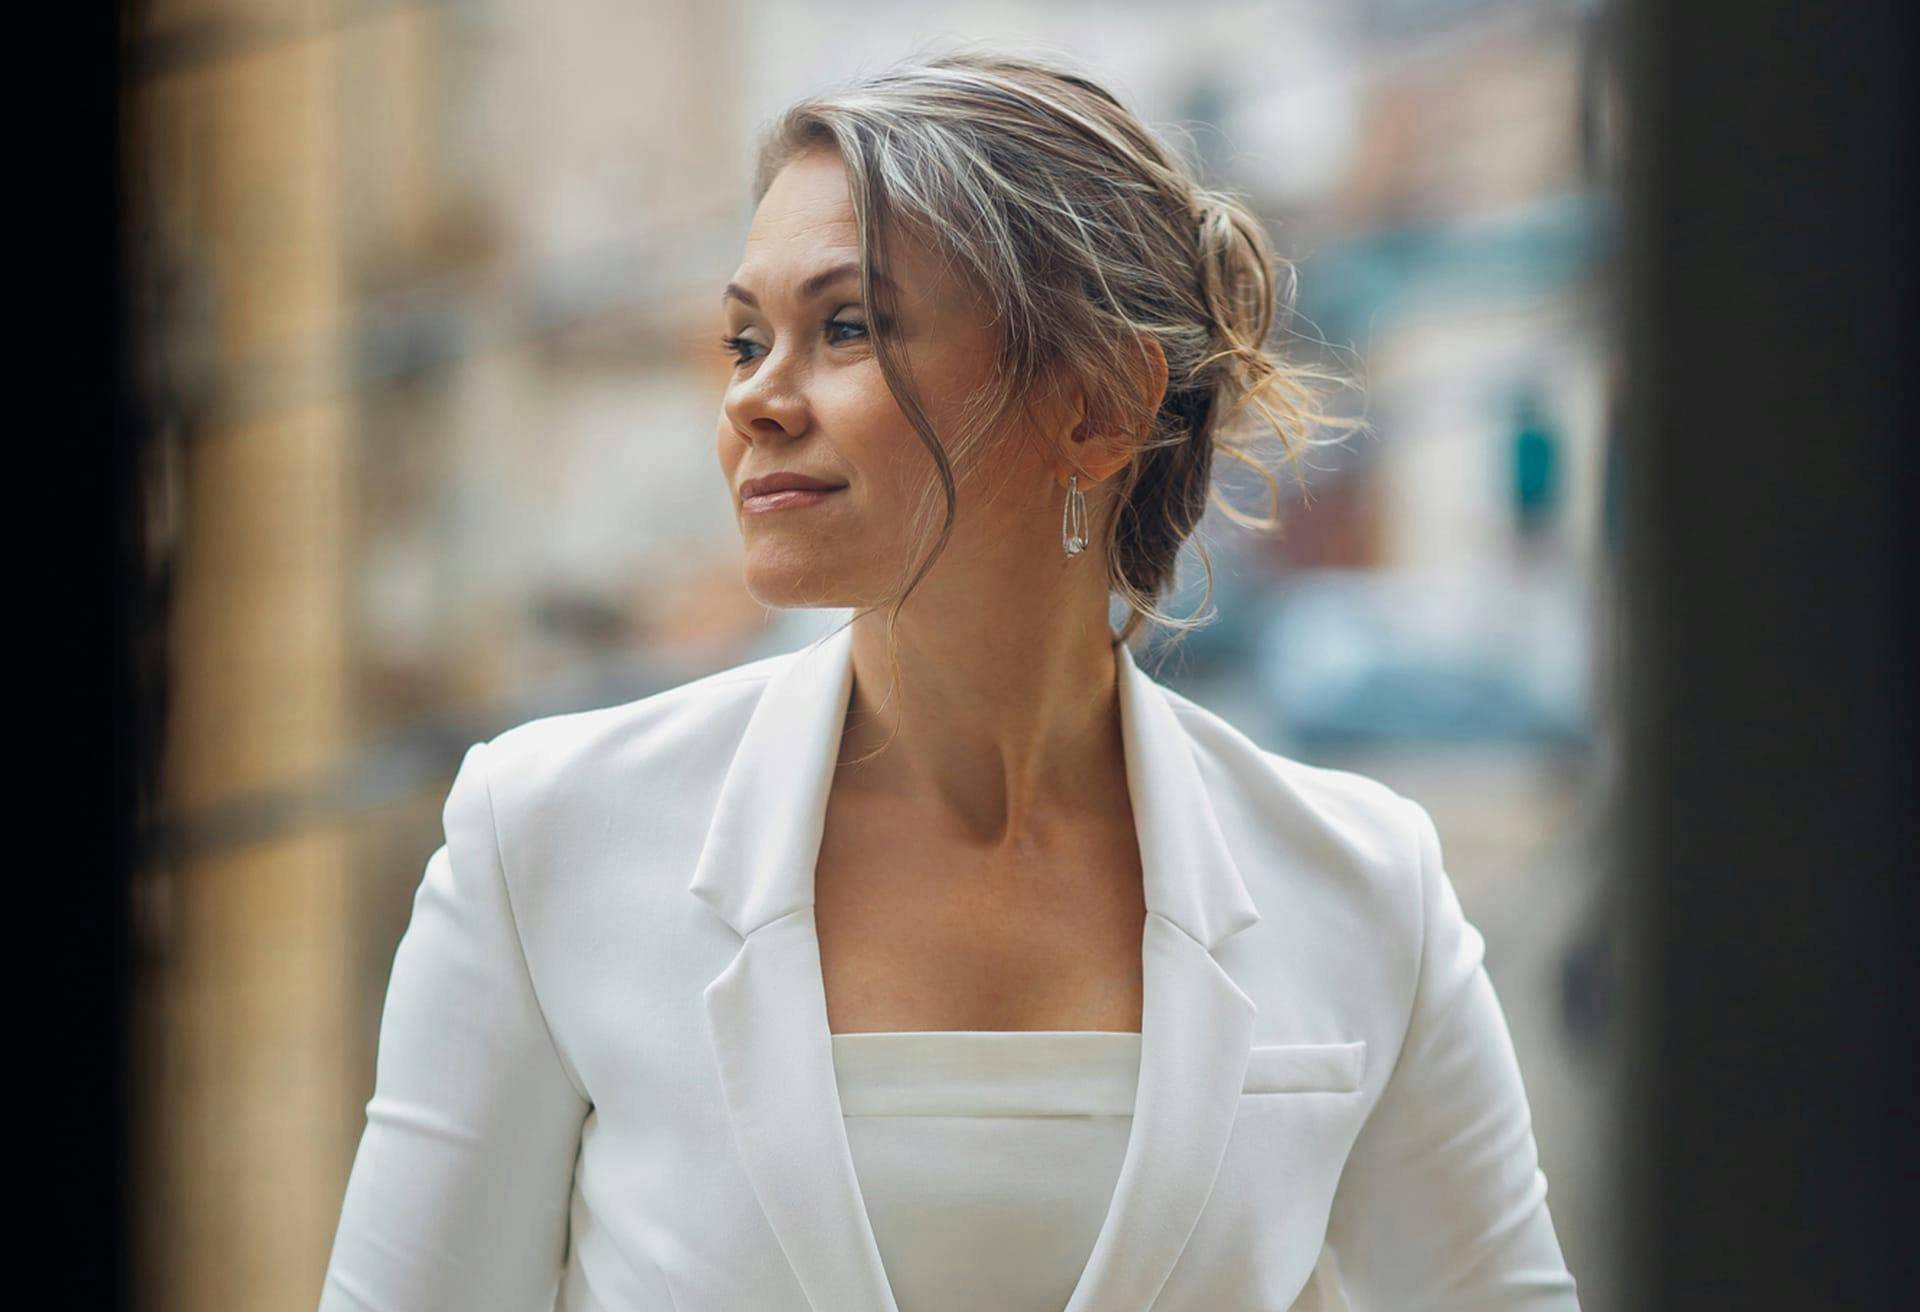 Woman smiling in business clothes looking to her right